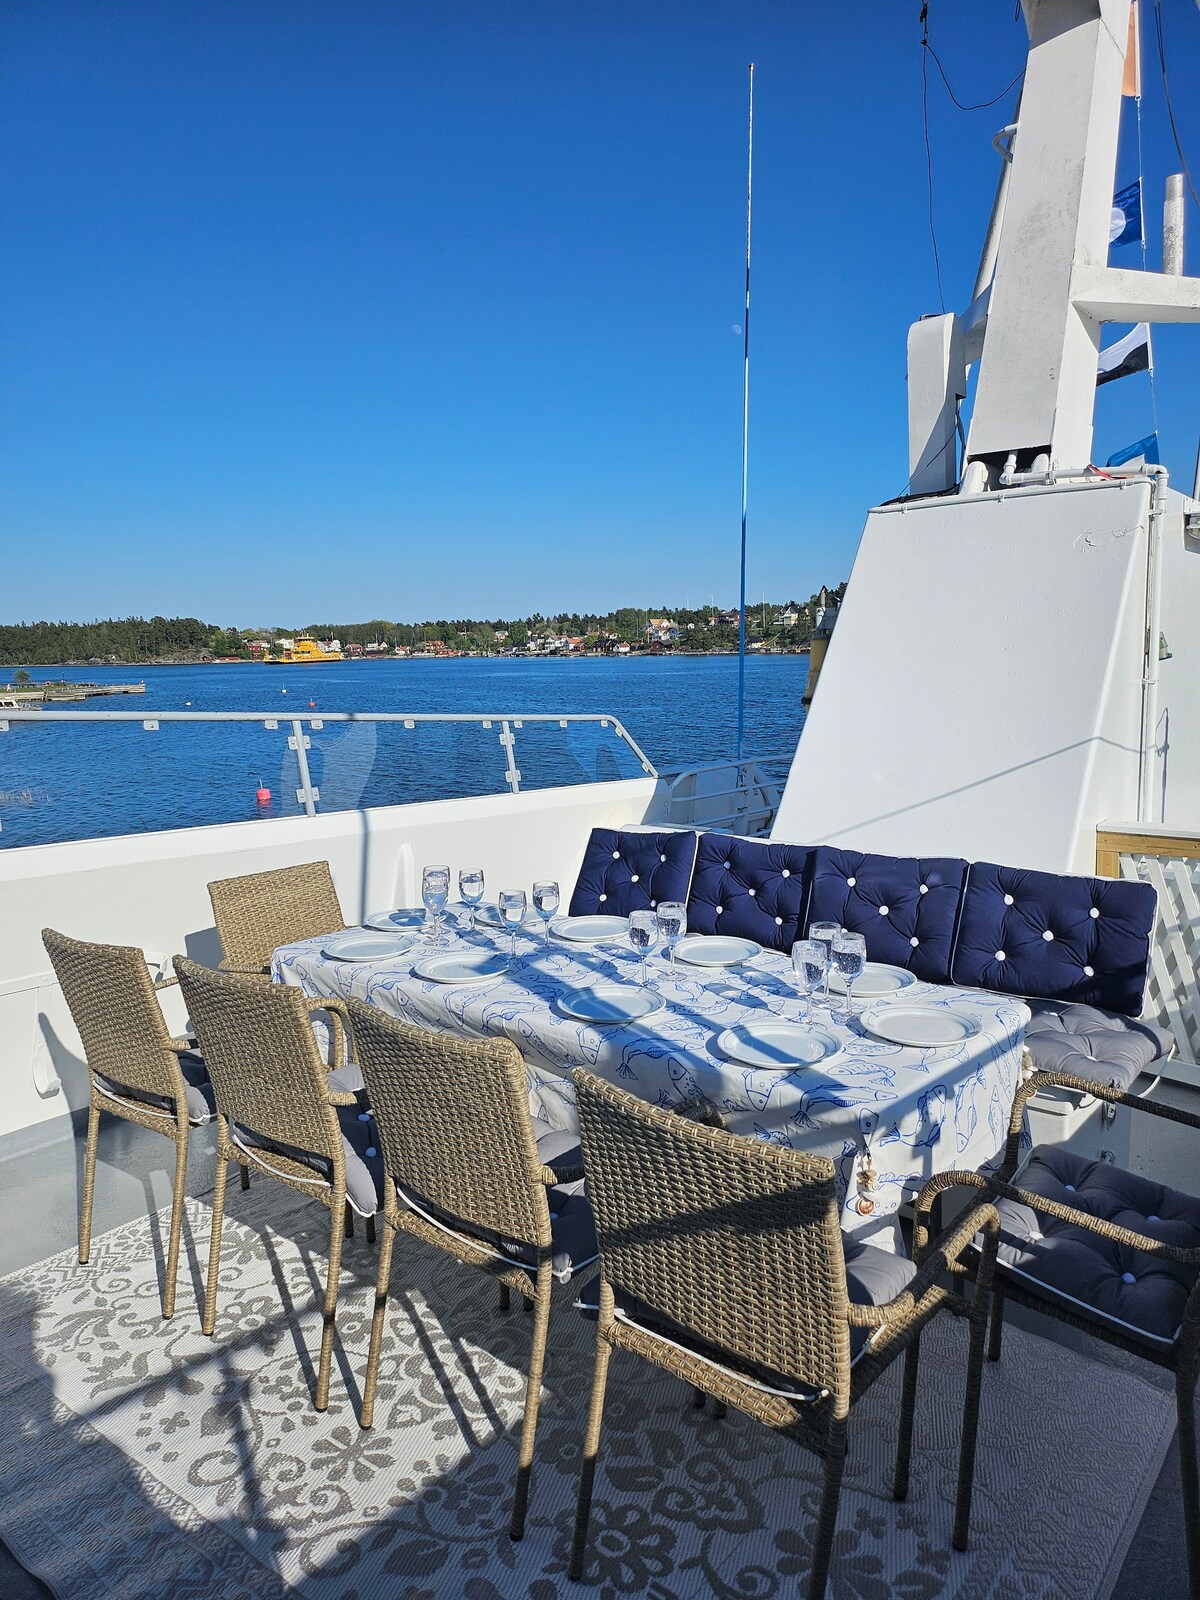 Live on a boat in the  Archipelago. M/S Furusund